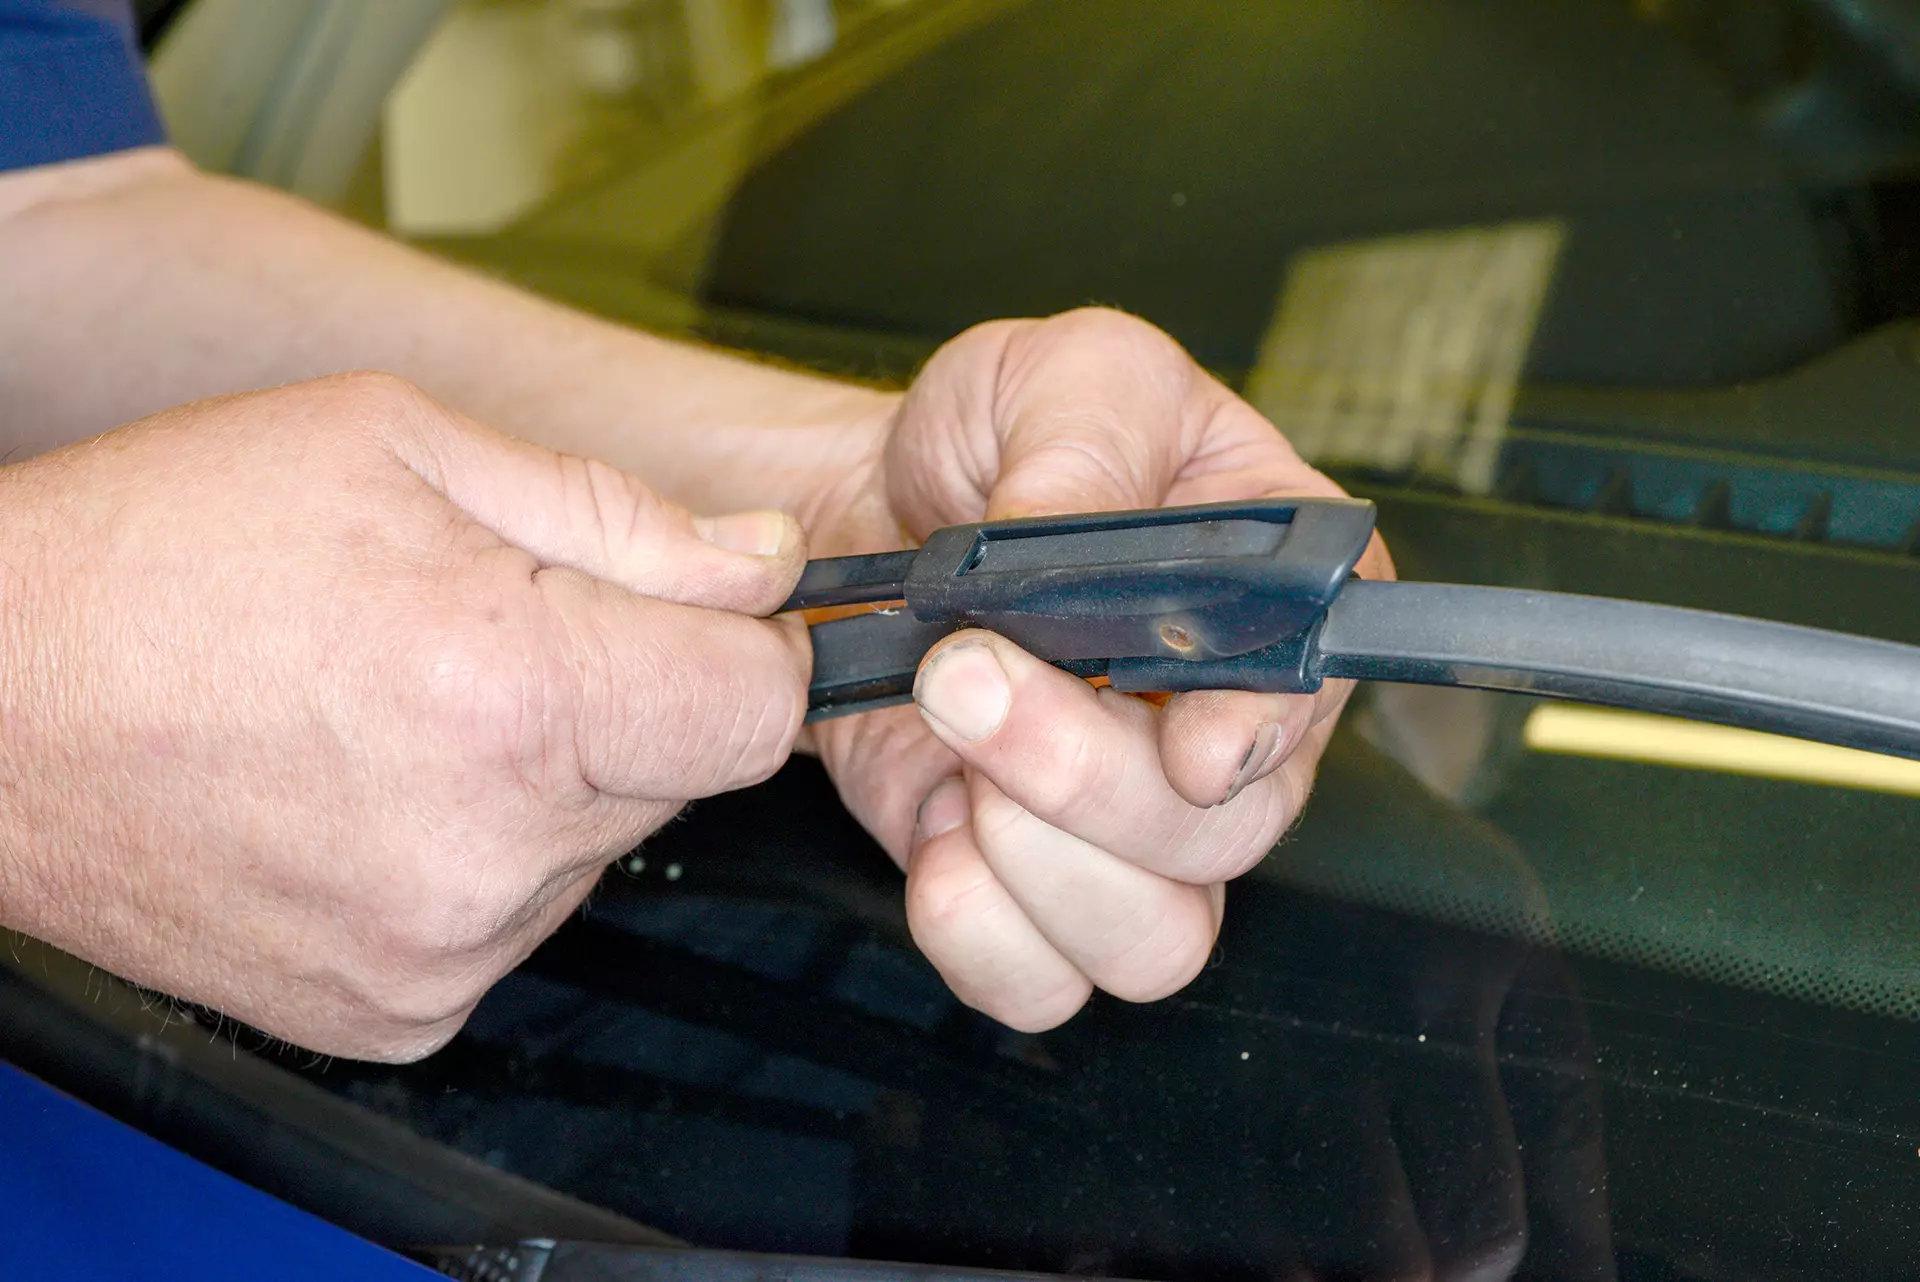 How to choose and fit new wiper blades